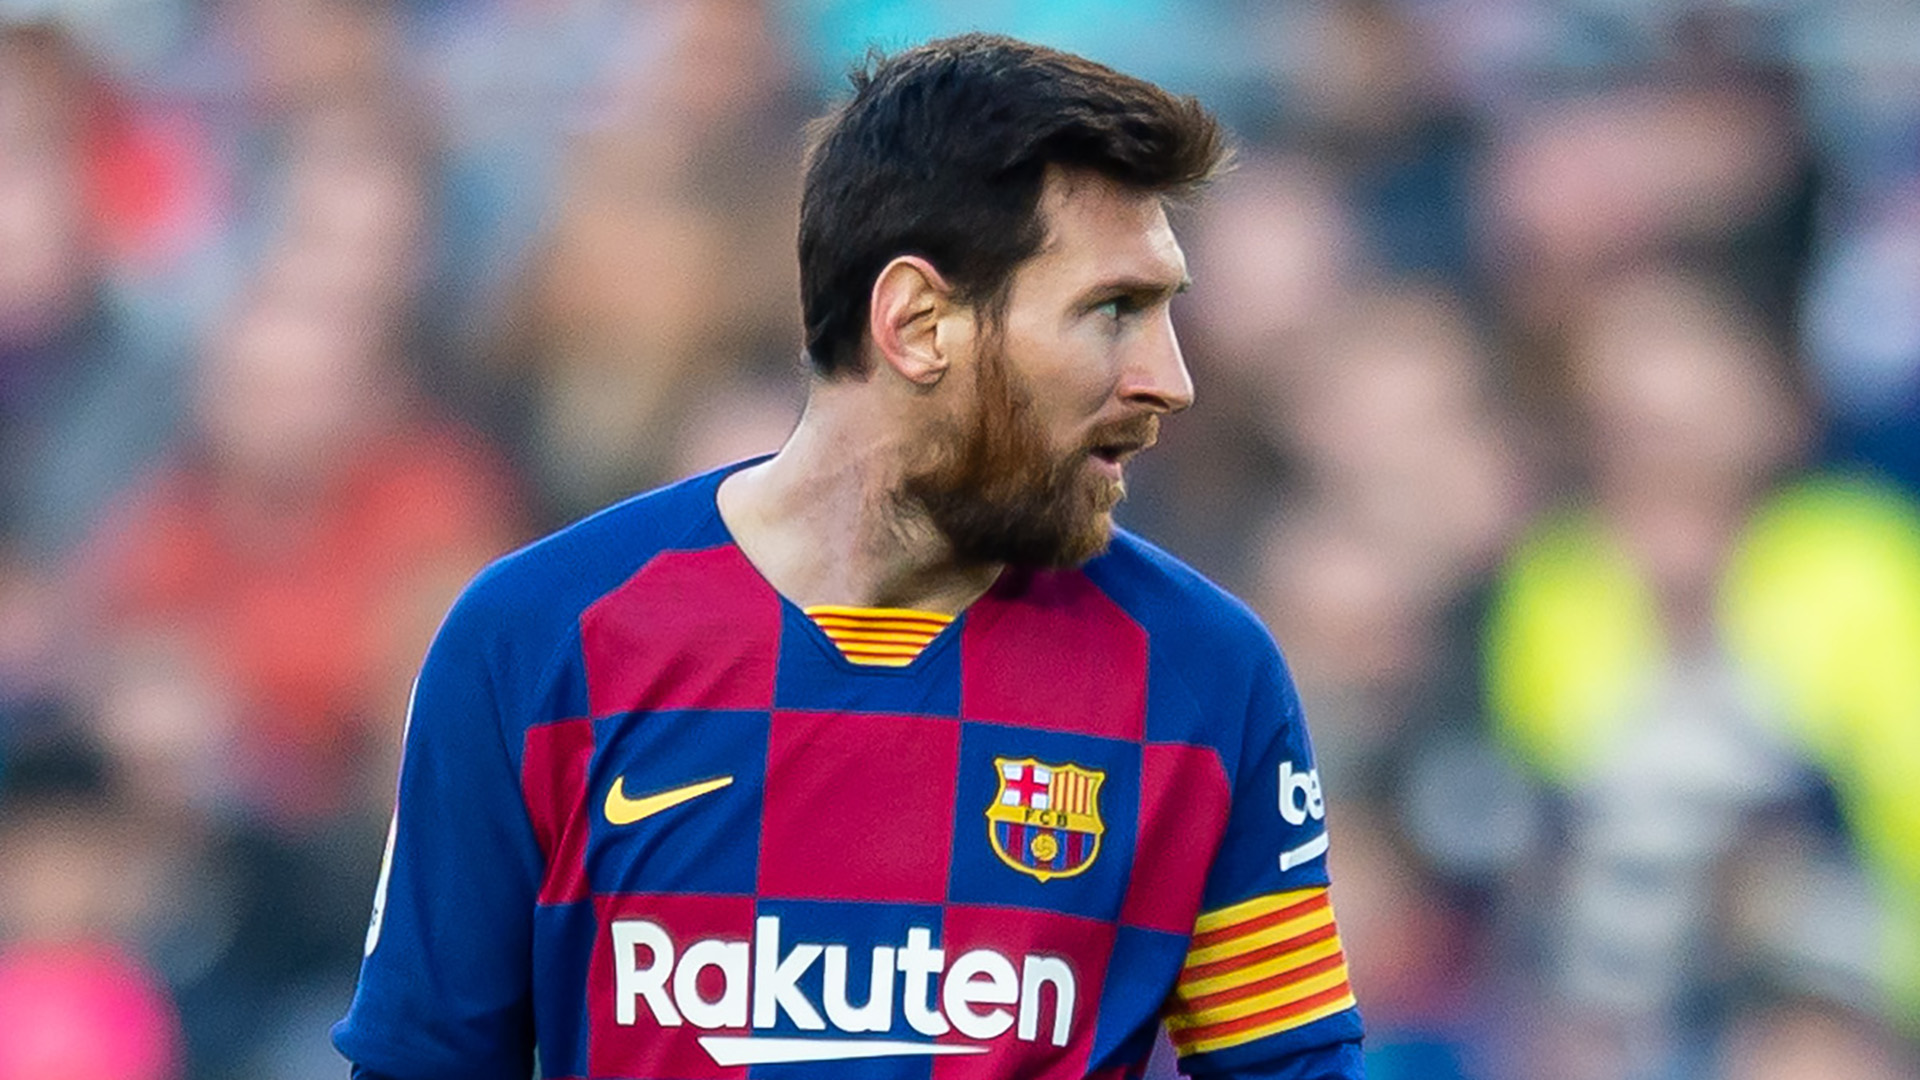 'King of Catalunya' Messi backed to end career at Barcelona after emotional U-turn